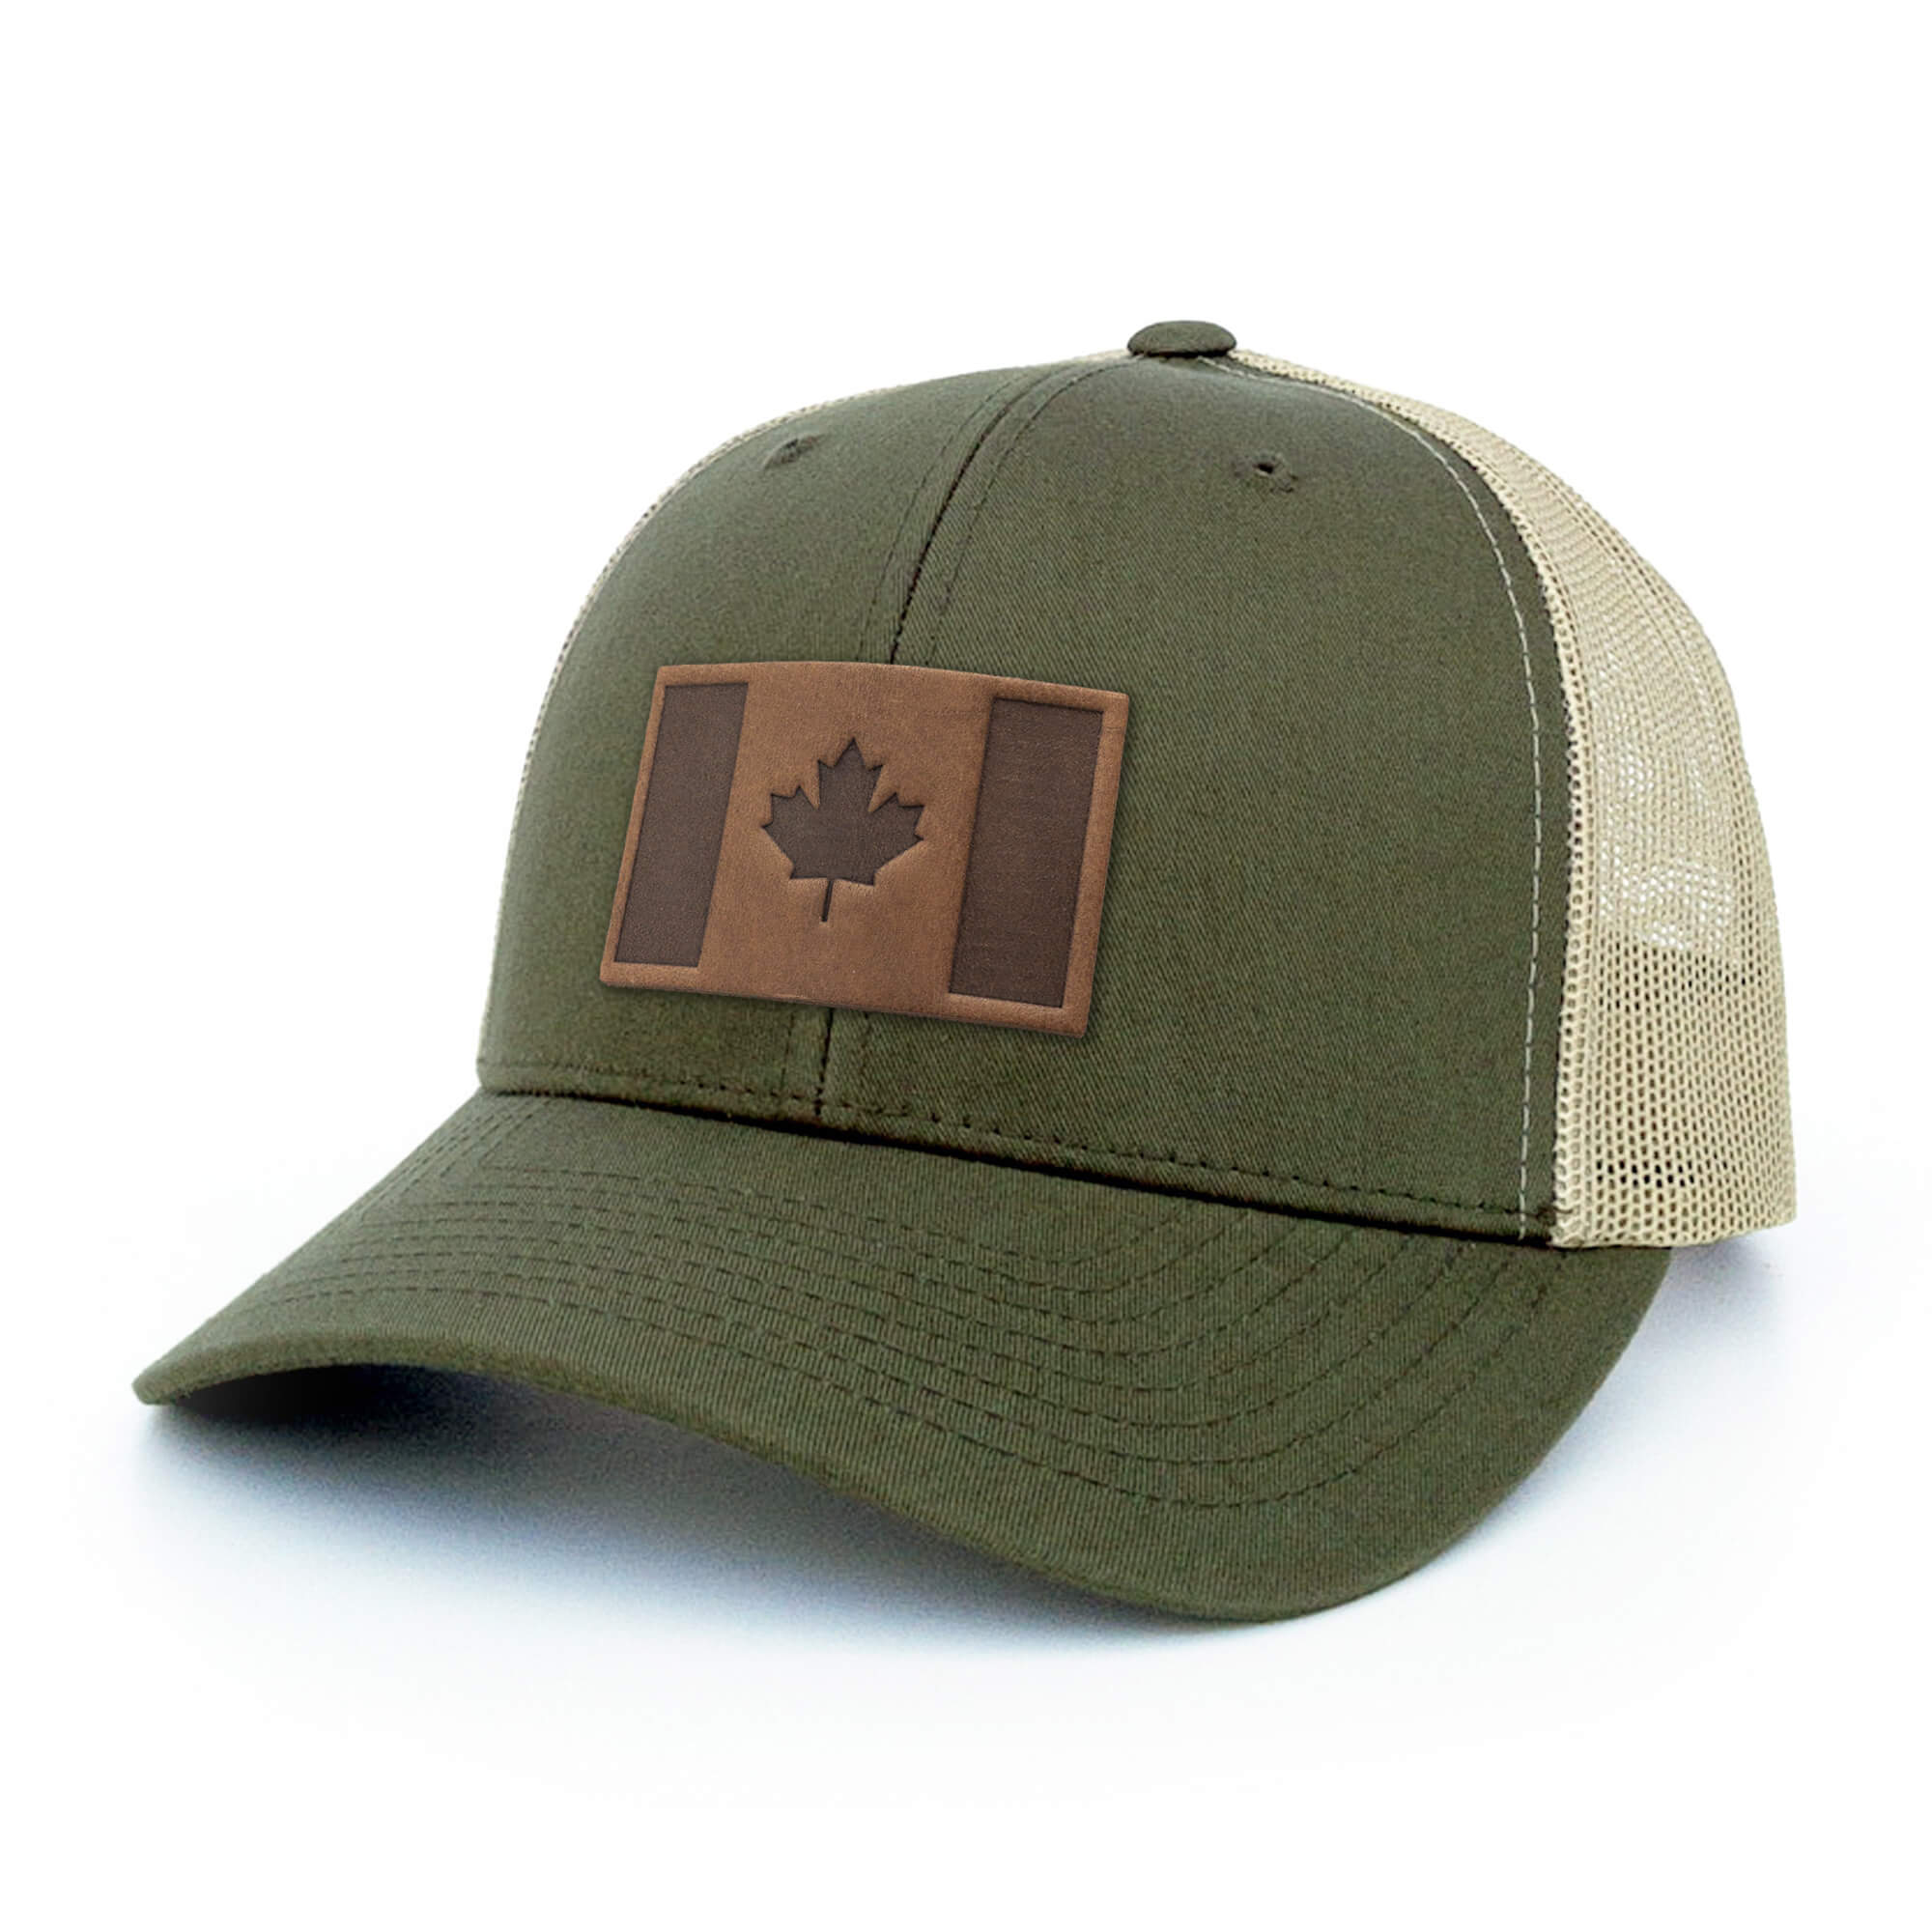 Moss Green and khaki trucker hat with full-grain leather patch of Canada Flag | BLACK-002-009, CHARC-002-009, NAVY-002-009, HGREY-002-009, MOSS-002-009, BROWN-002-009, RED-002-009